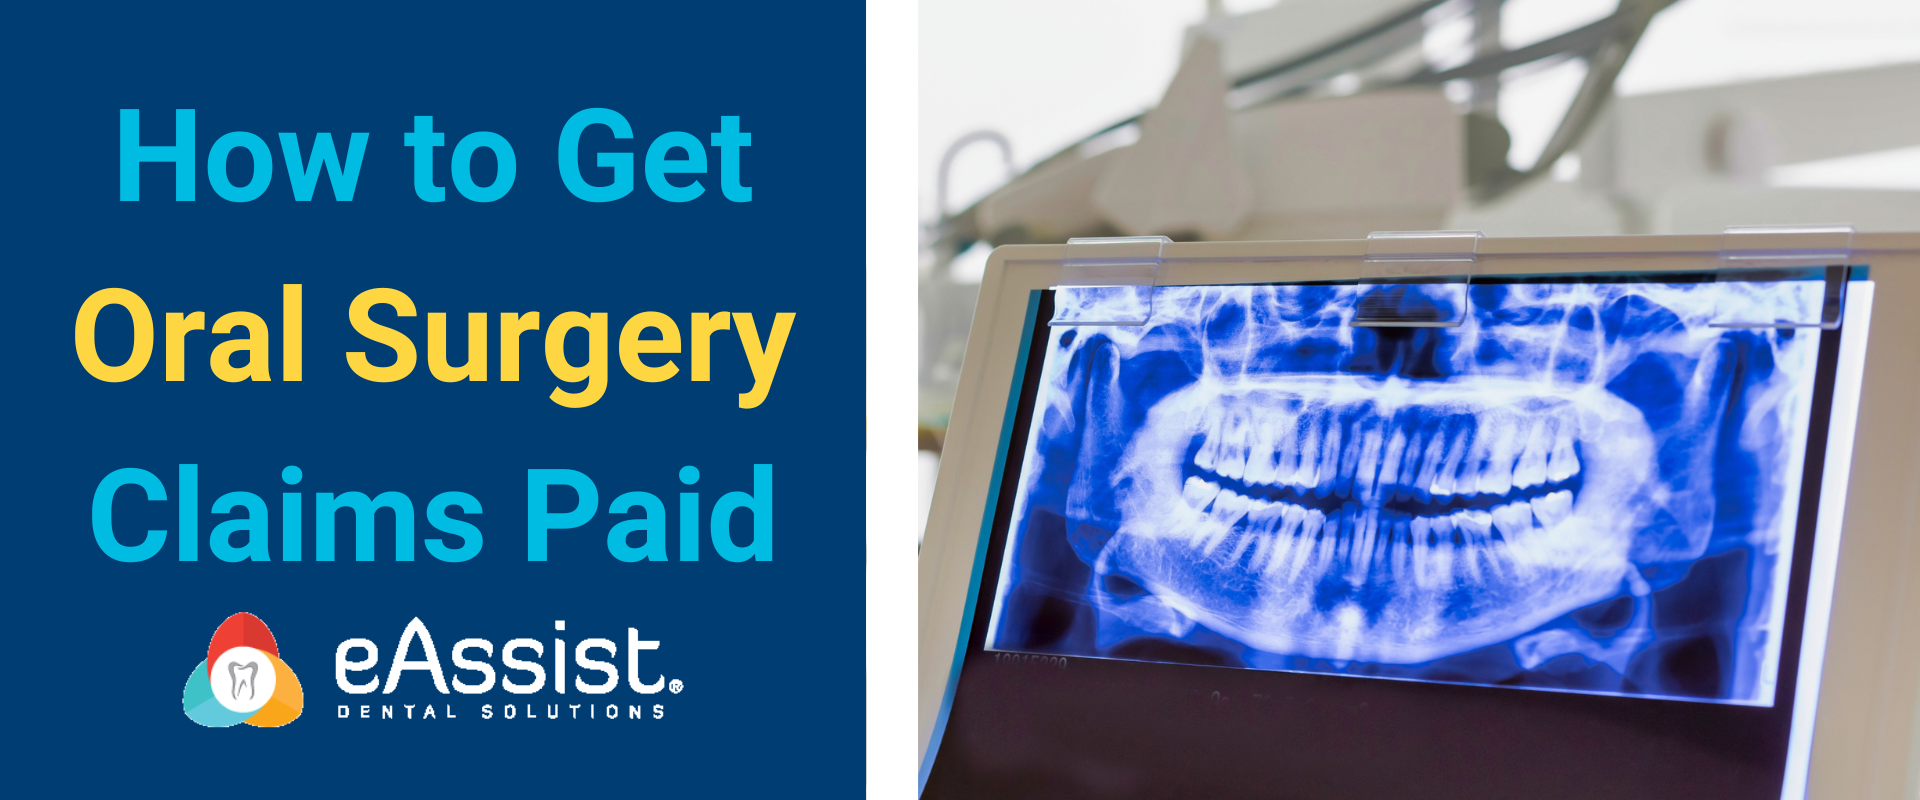 How to Get Oral Surgery Claims Paid